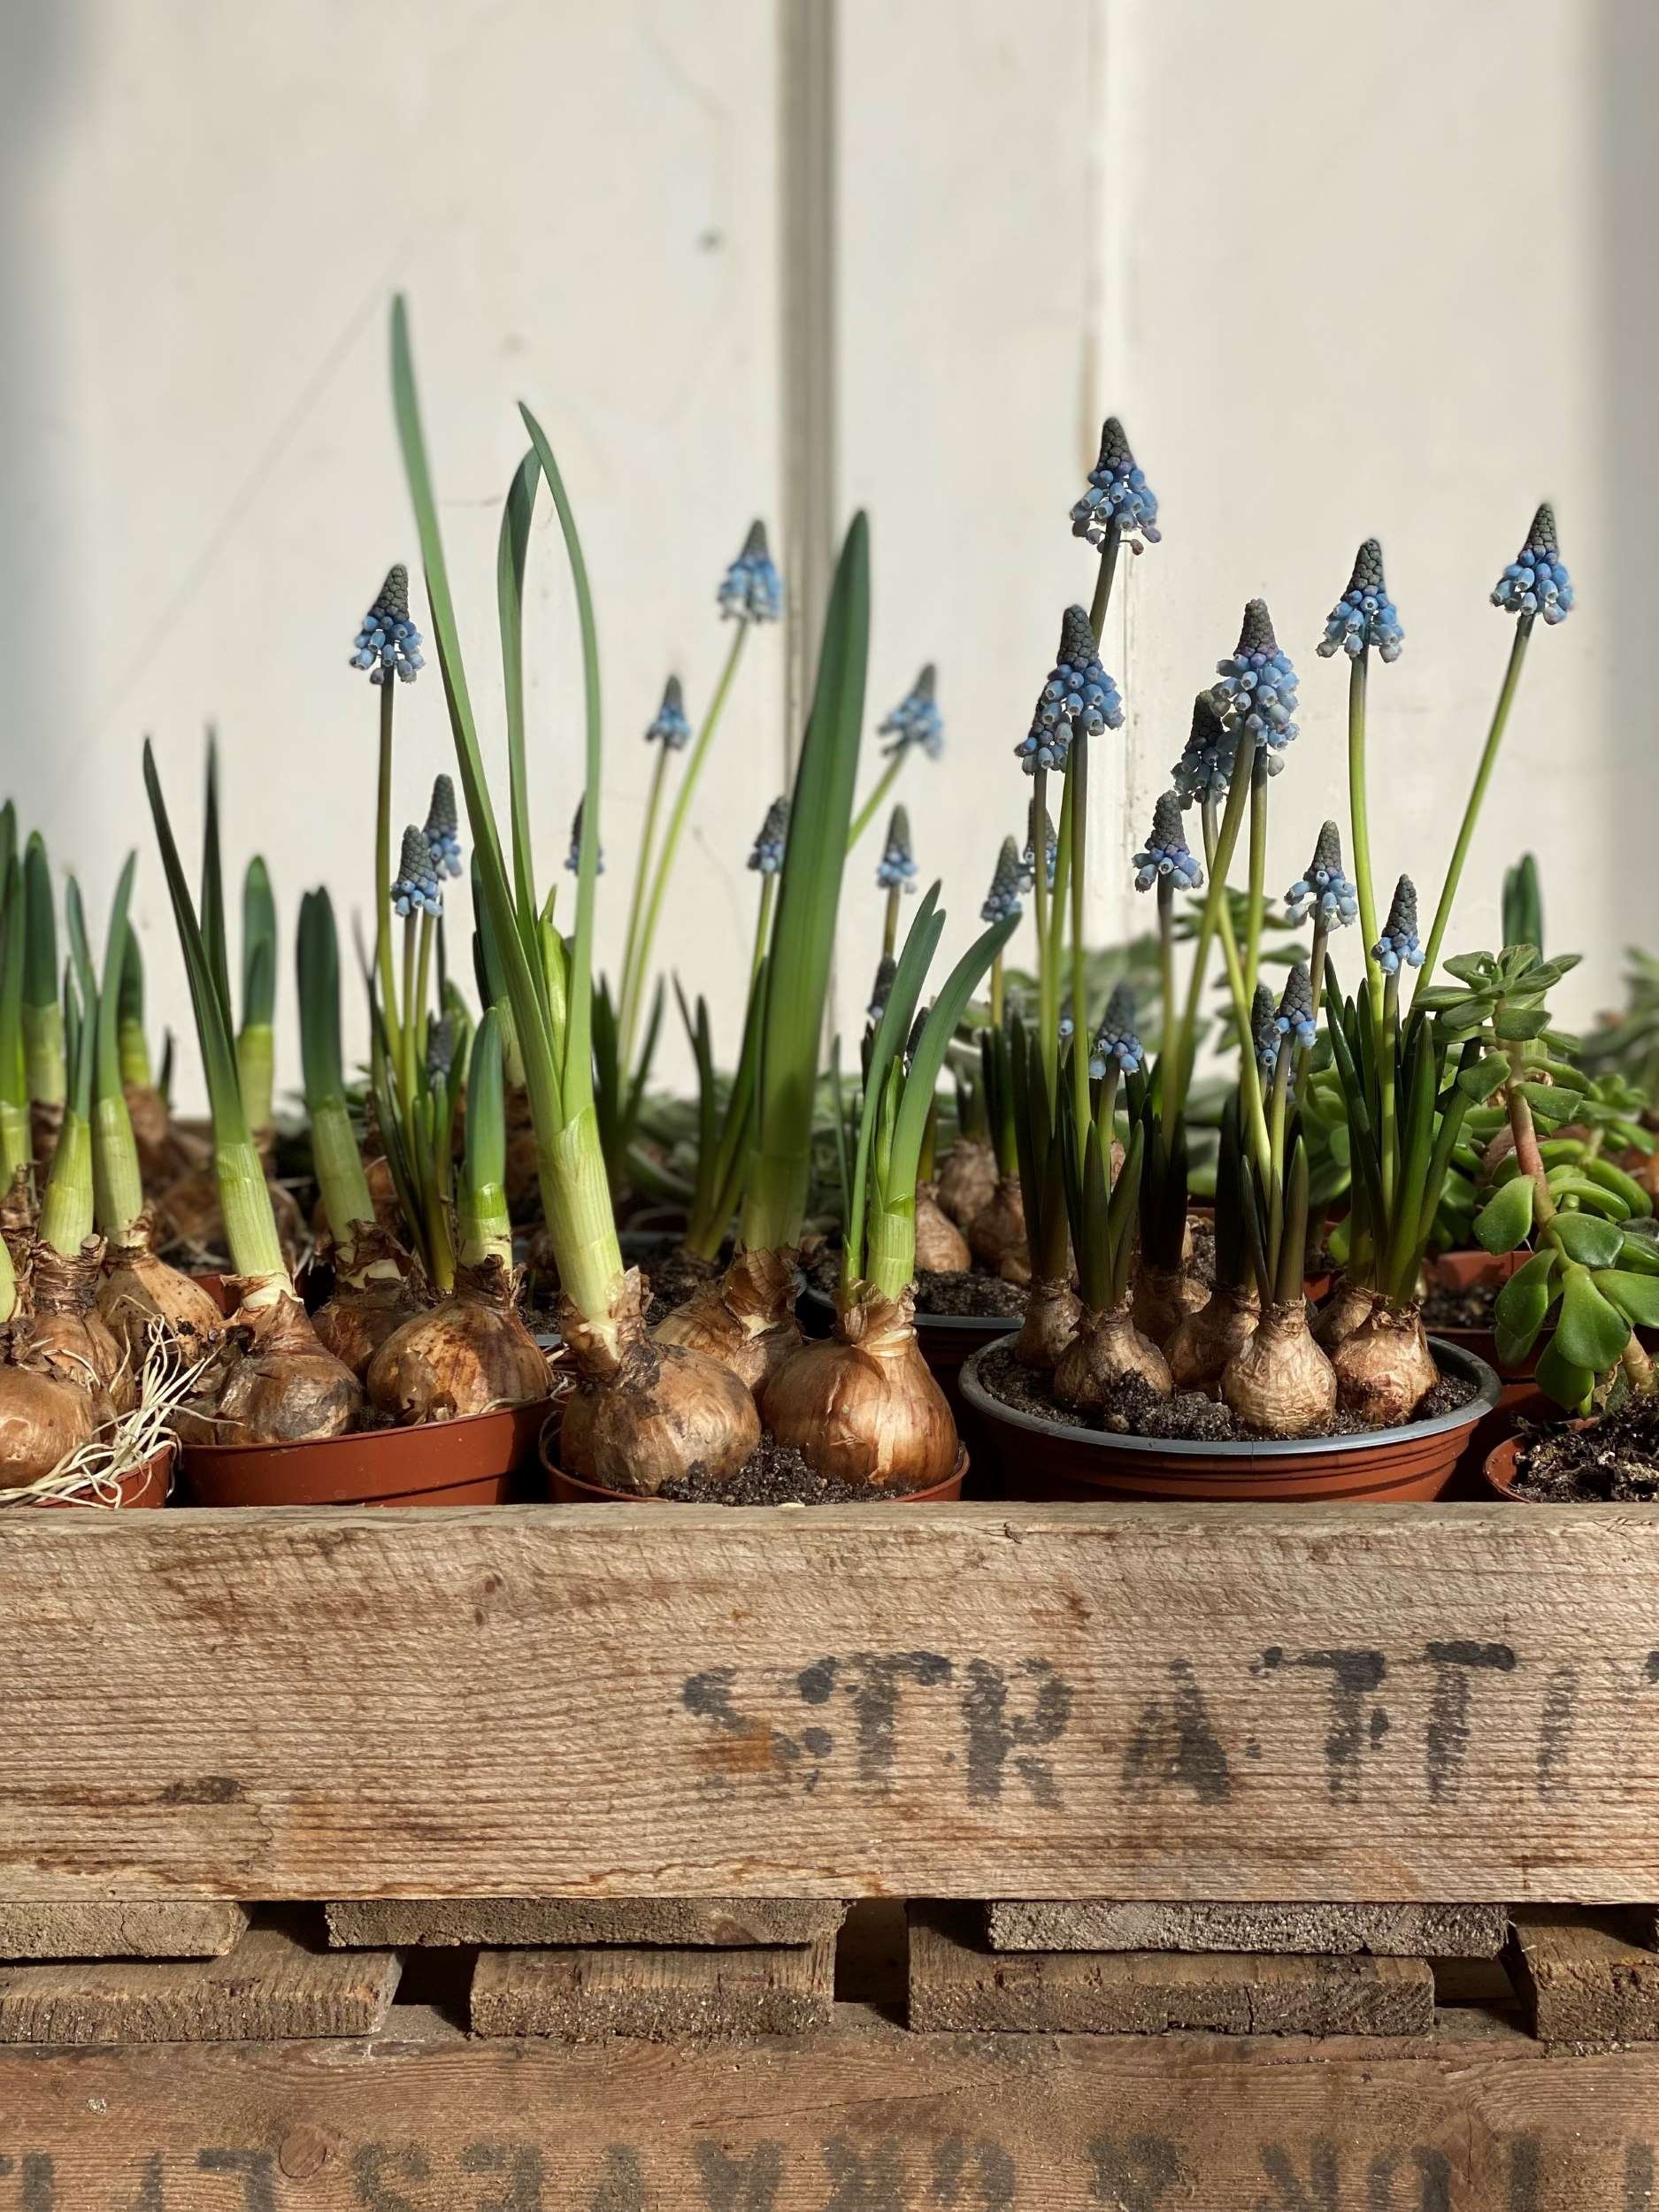 Wooden crate full of muscari bulbs for the mothers day workshop